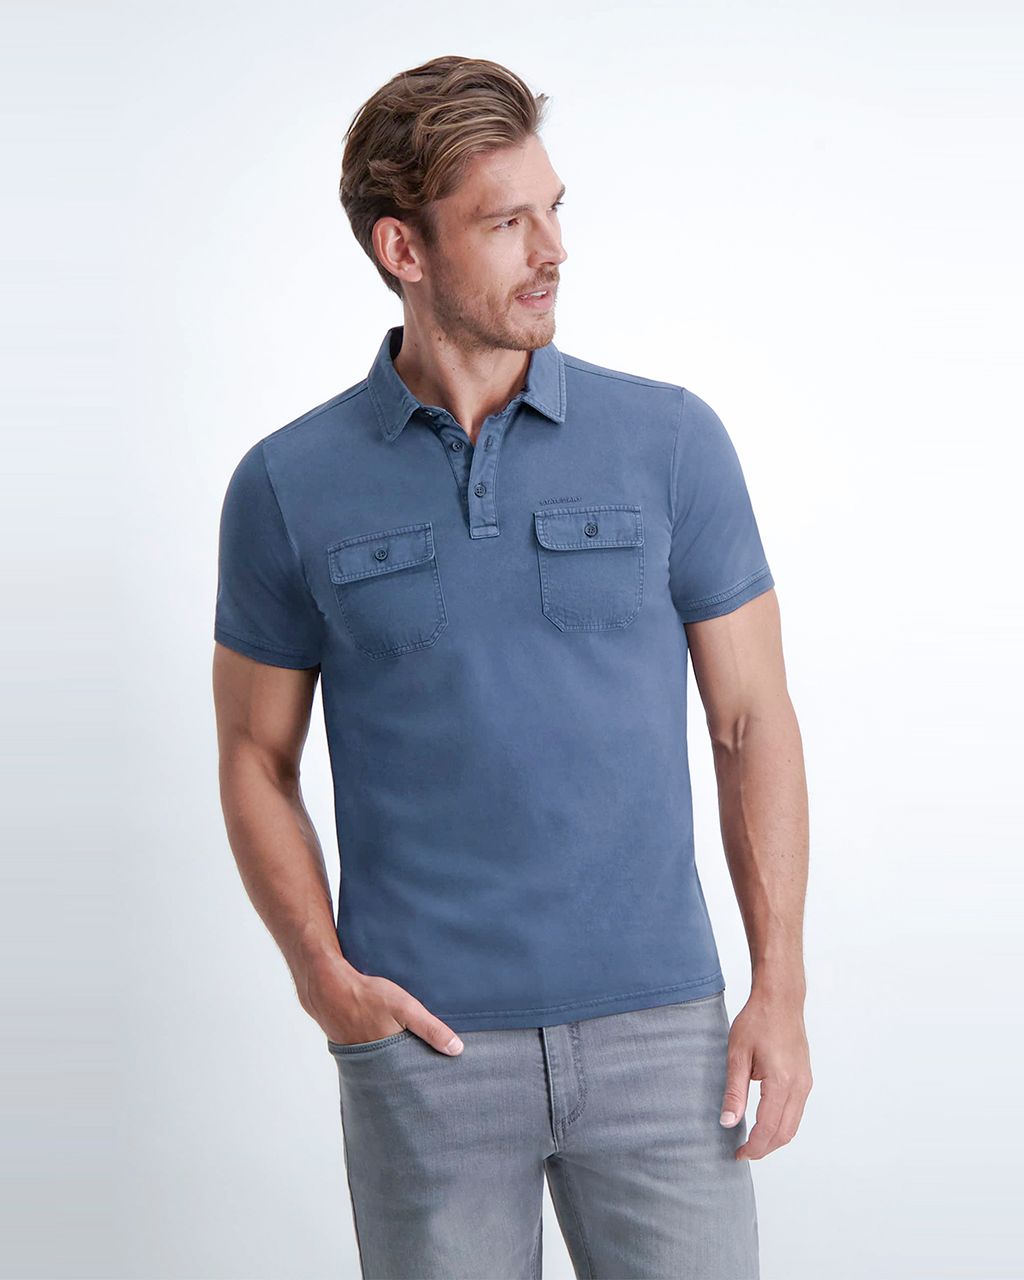 State of Art Polo KM Donker blauw 077879-001-4XL